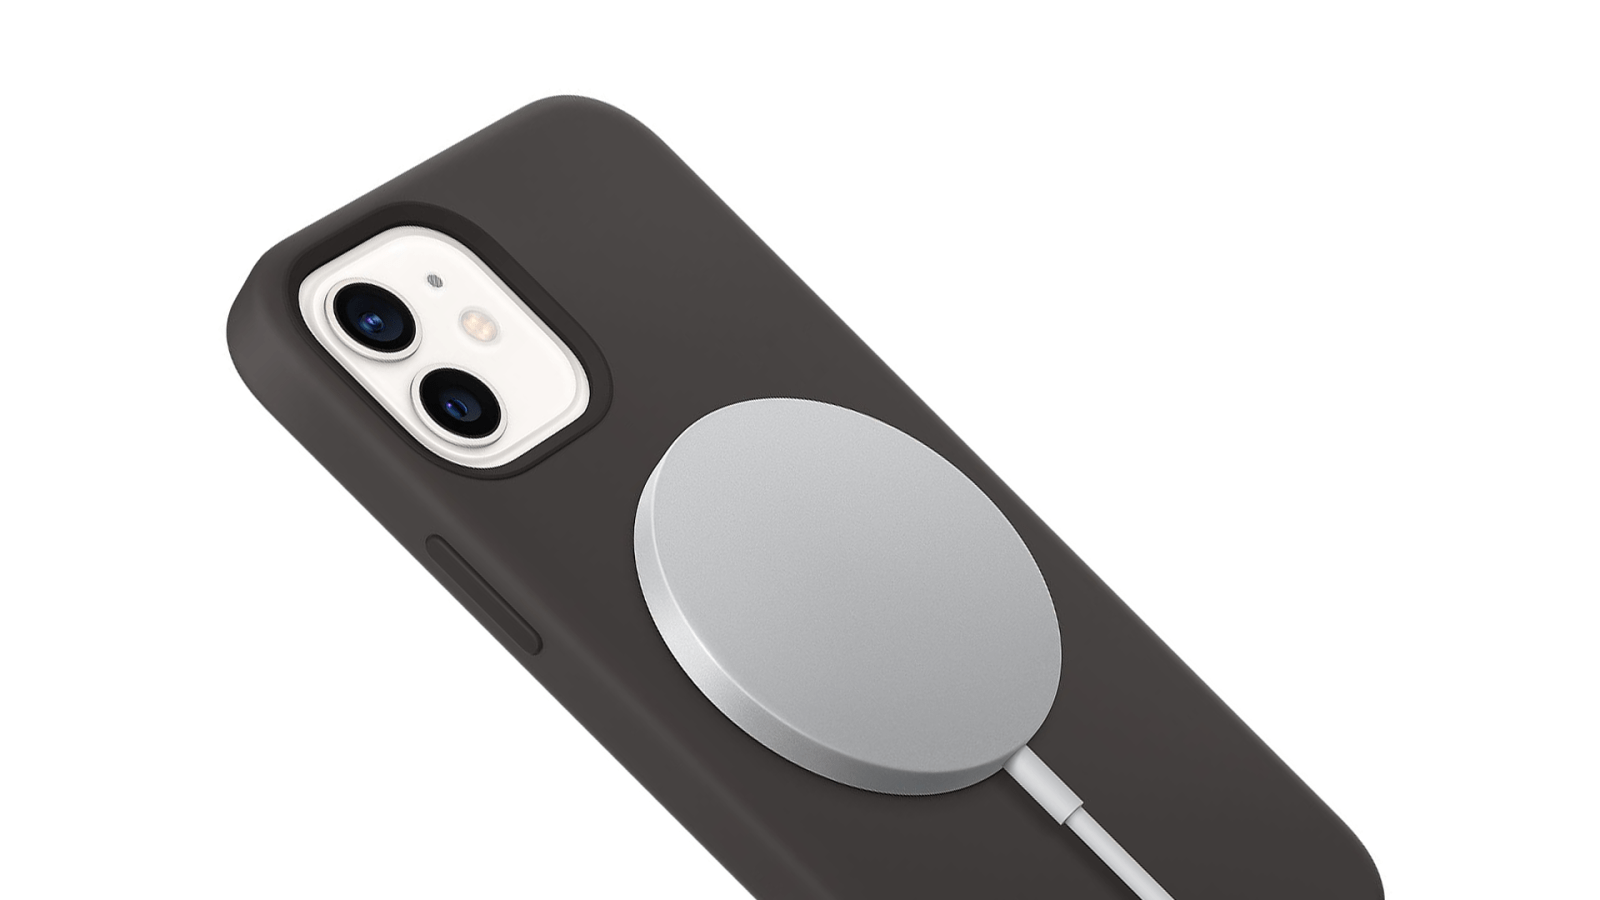 Apple publishes a design guide for official iPhone 12 MagSafe accessories